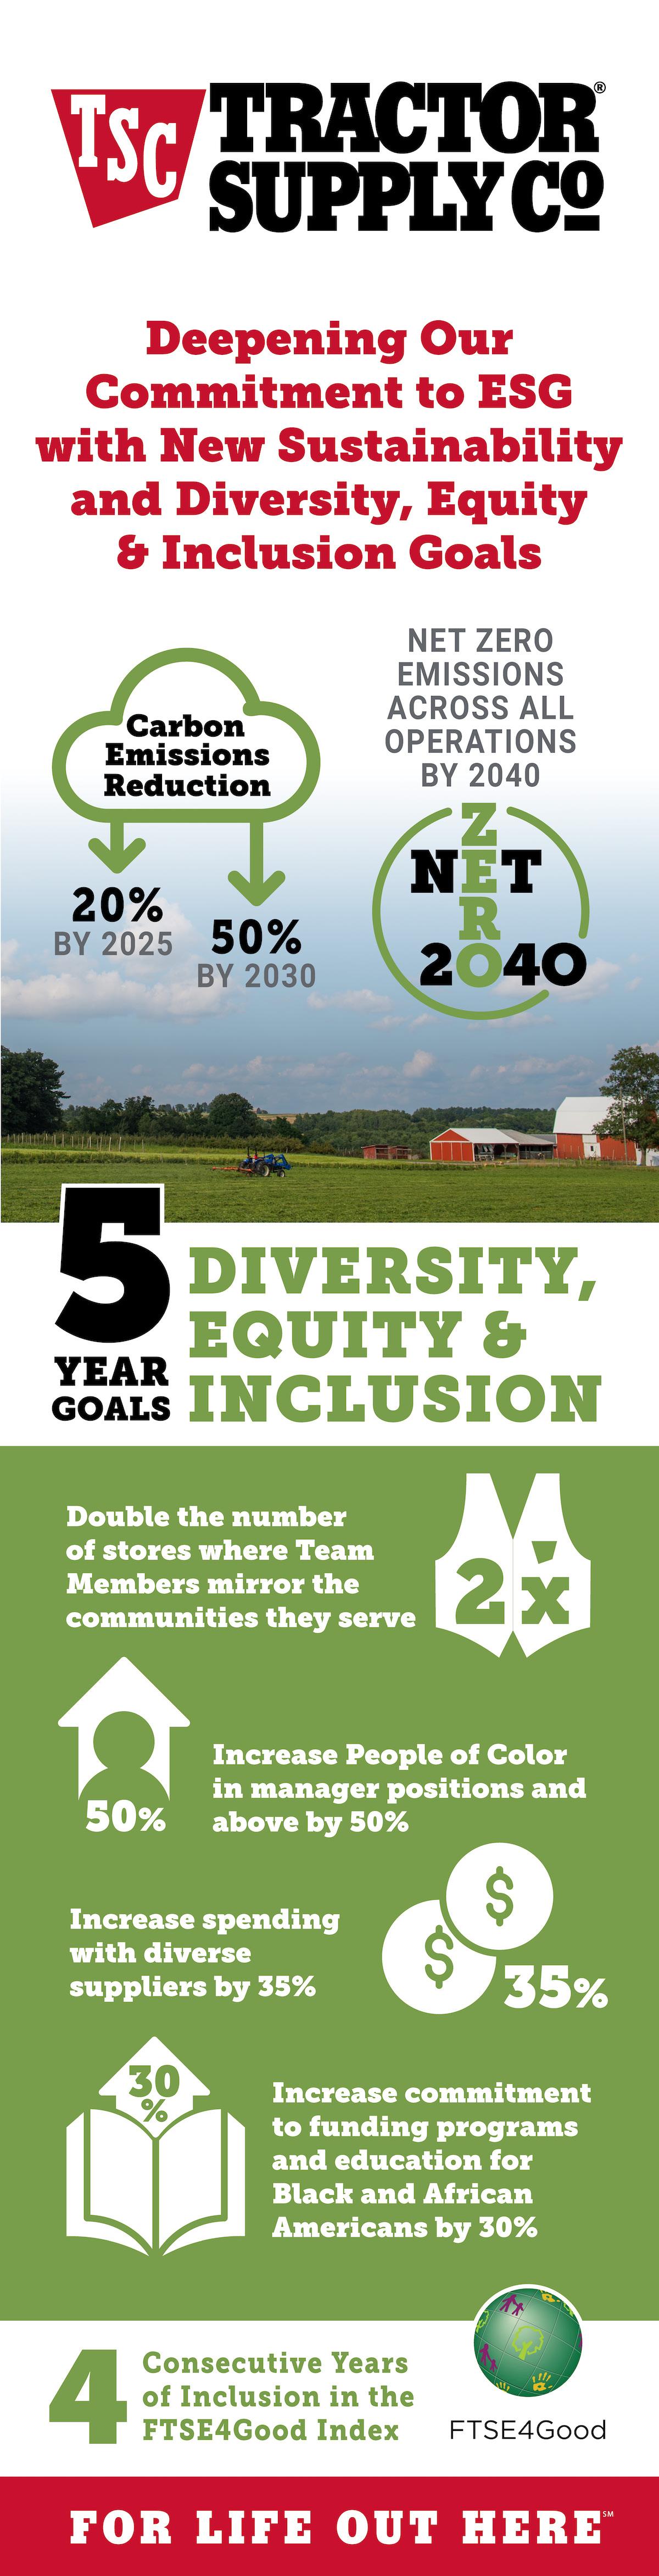 Tractor Supply Co Diversity, Equity & Inclusion poster